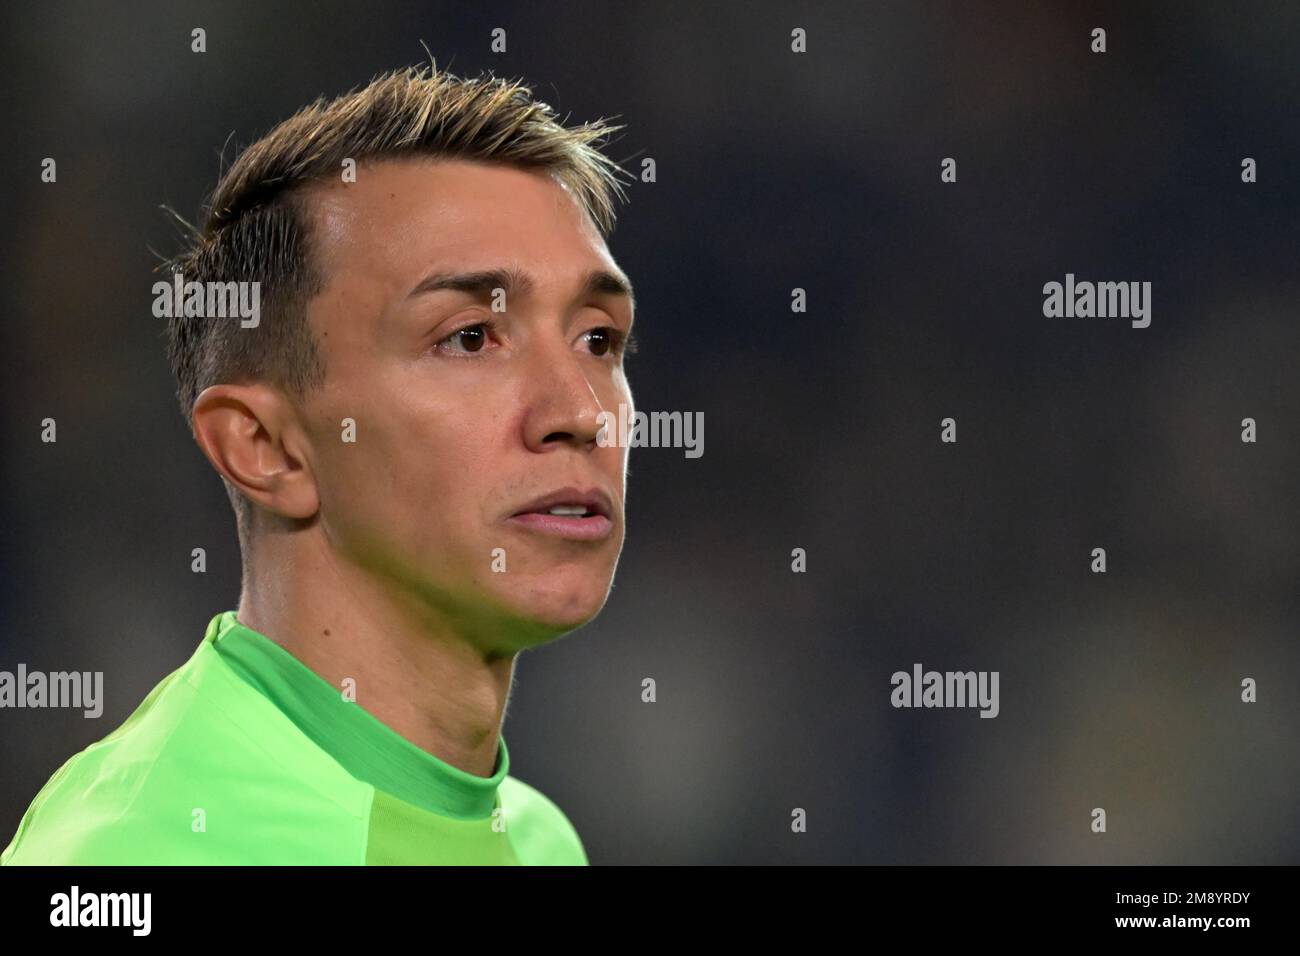 ISTANBUL - Galatasaray AS goalkeeper Fernando Muslera during the Turkish Super Lig match between Fenerbahce AS and Galatasaray AS at Ulker stadium on January 8, 2023 in Istanbul, Turkey. AP | Dutch Height | GERRIT OF COLOGNE Stock Photo